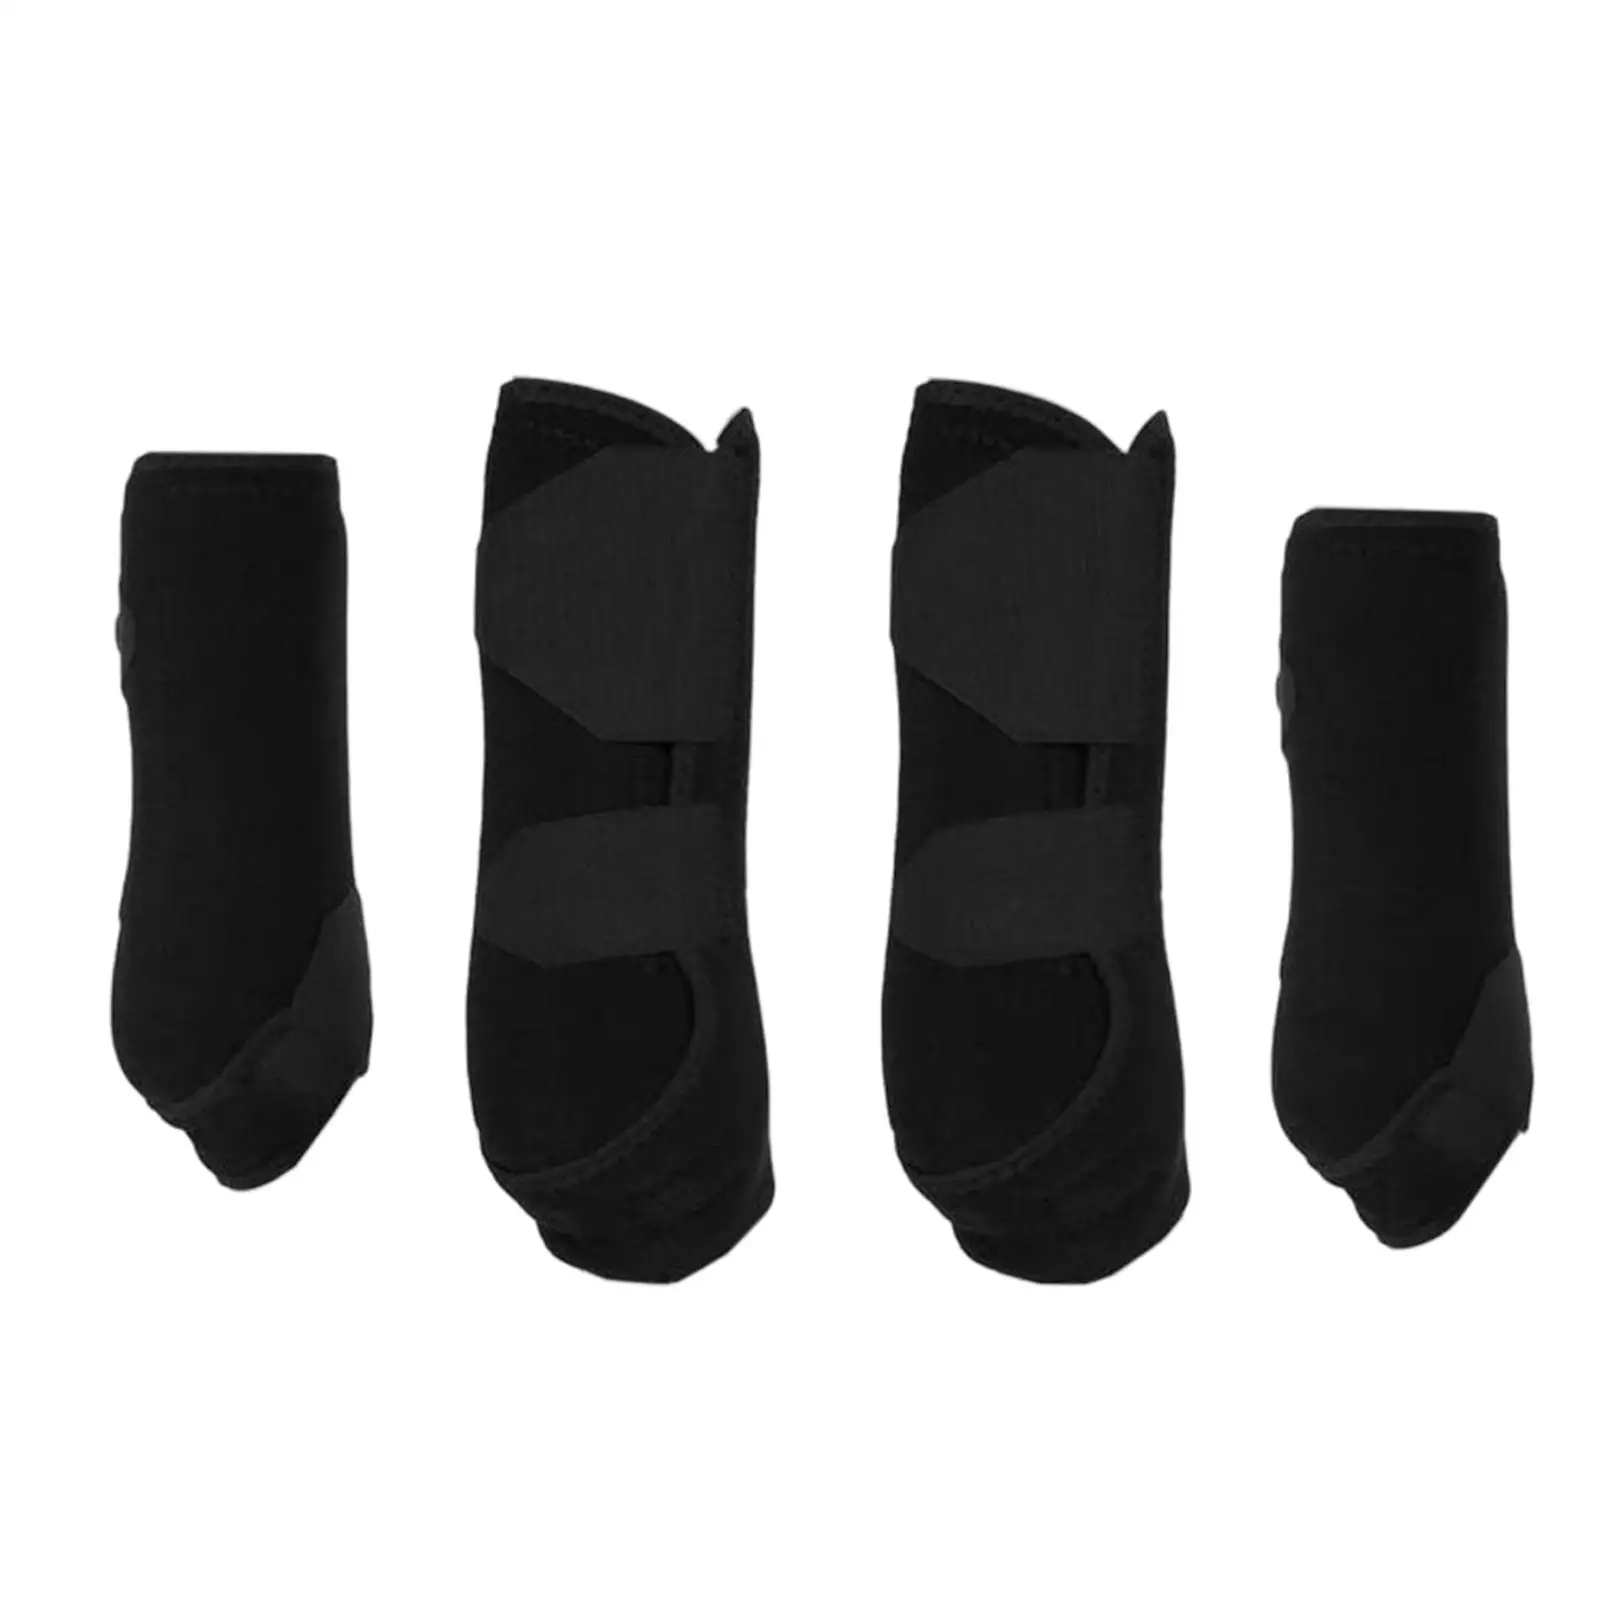 4x Neoprene Horse Boots Leg Protection Wraps Shock Absorbing Protector Gear for Jumping Riding Training Equestrian Equipment